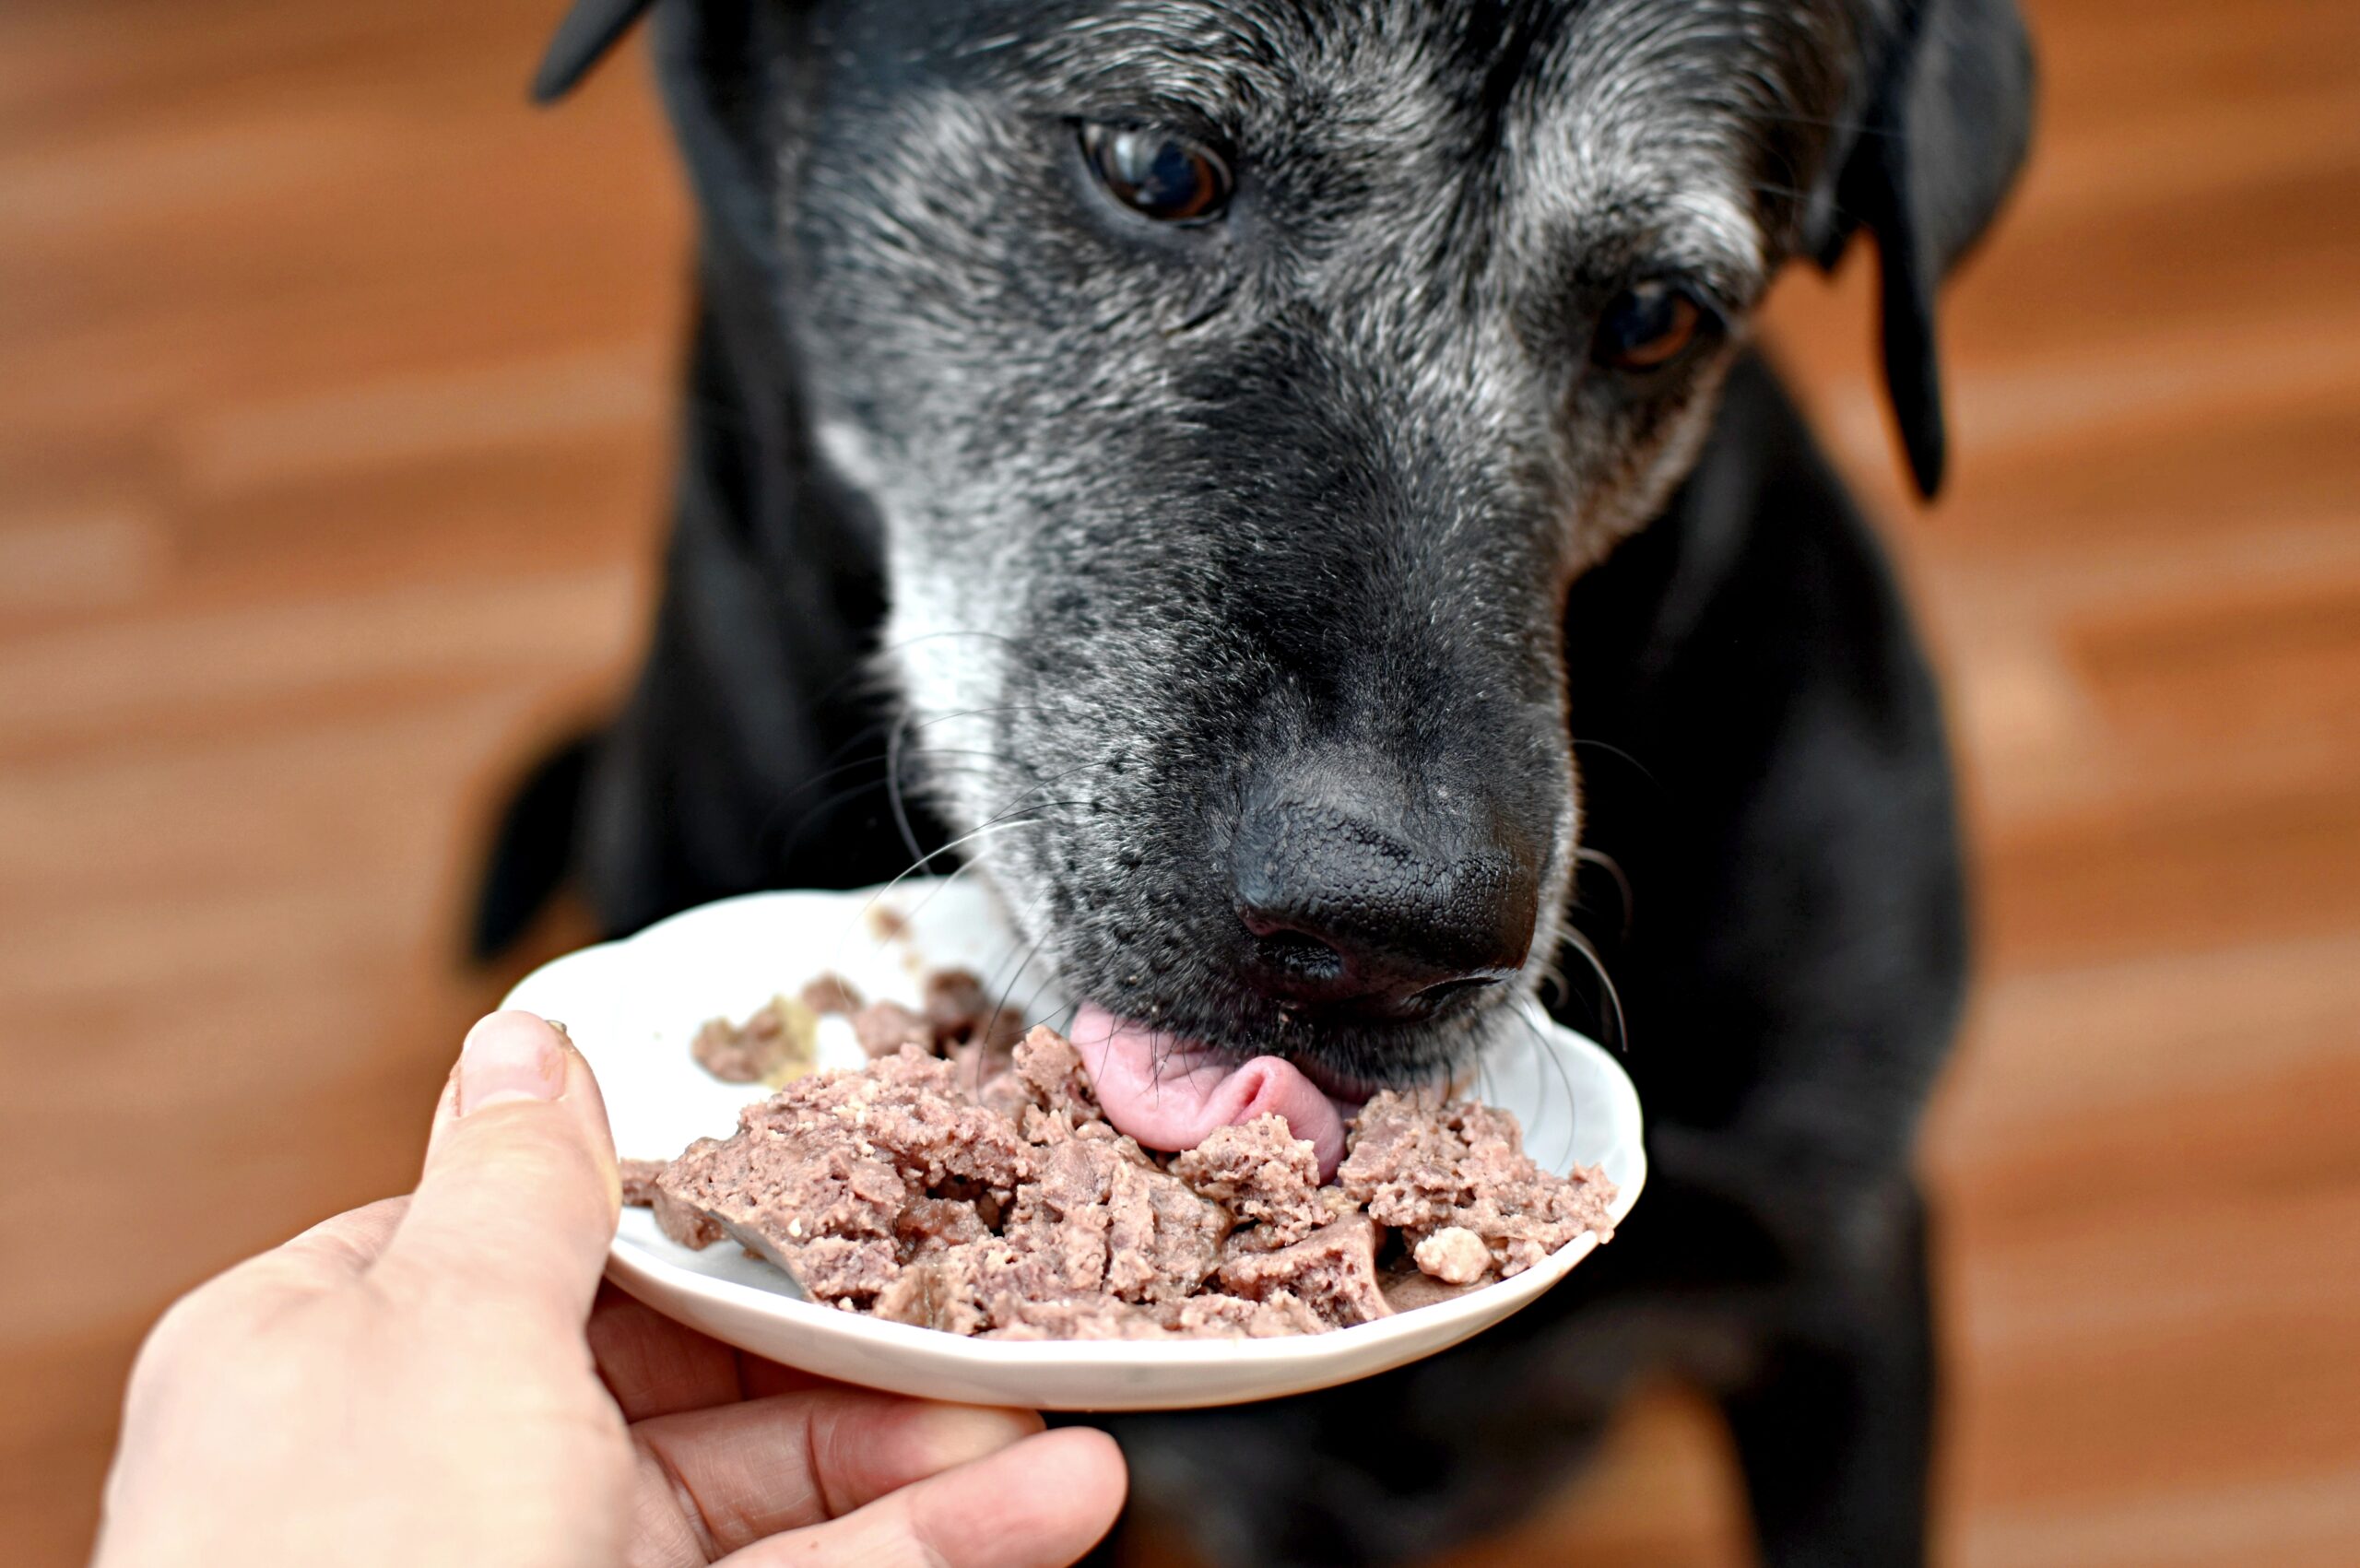 Dog,Eating,Canned,Meat,From,A,Saucer